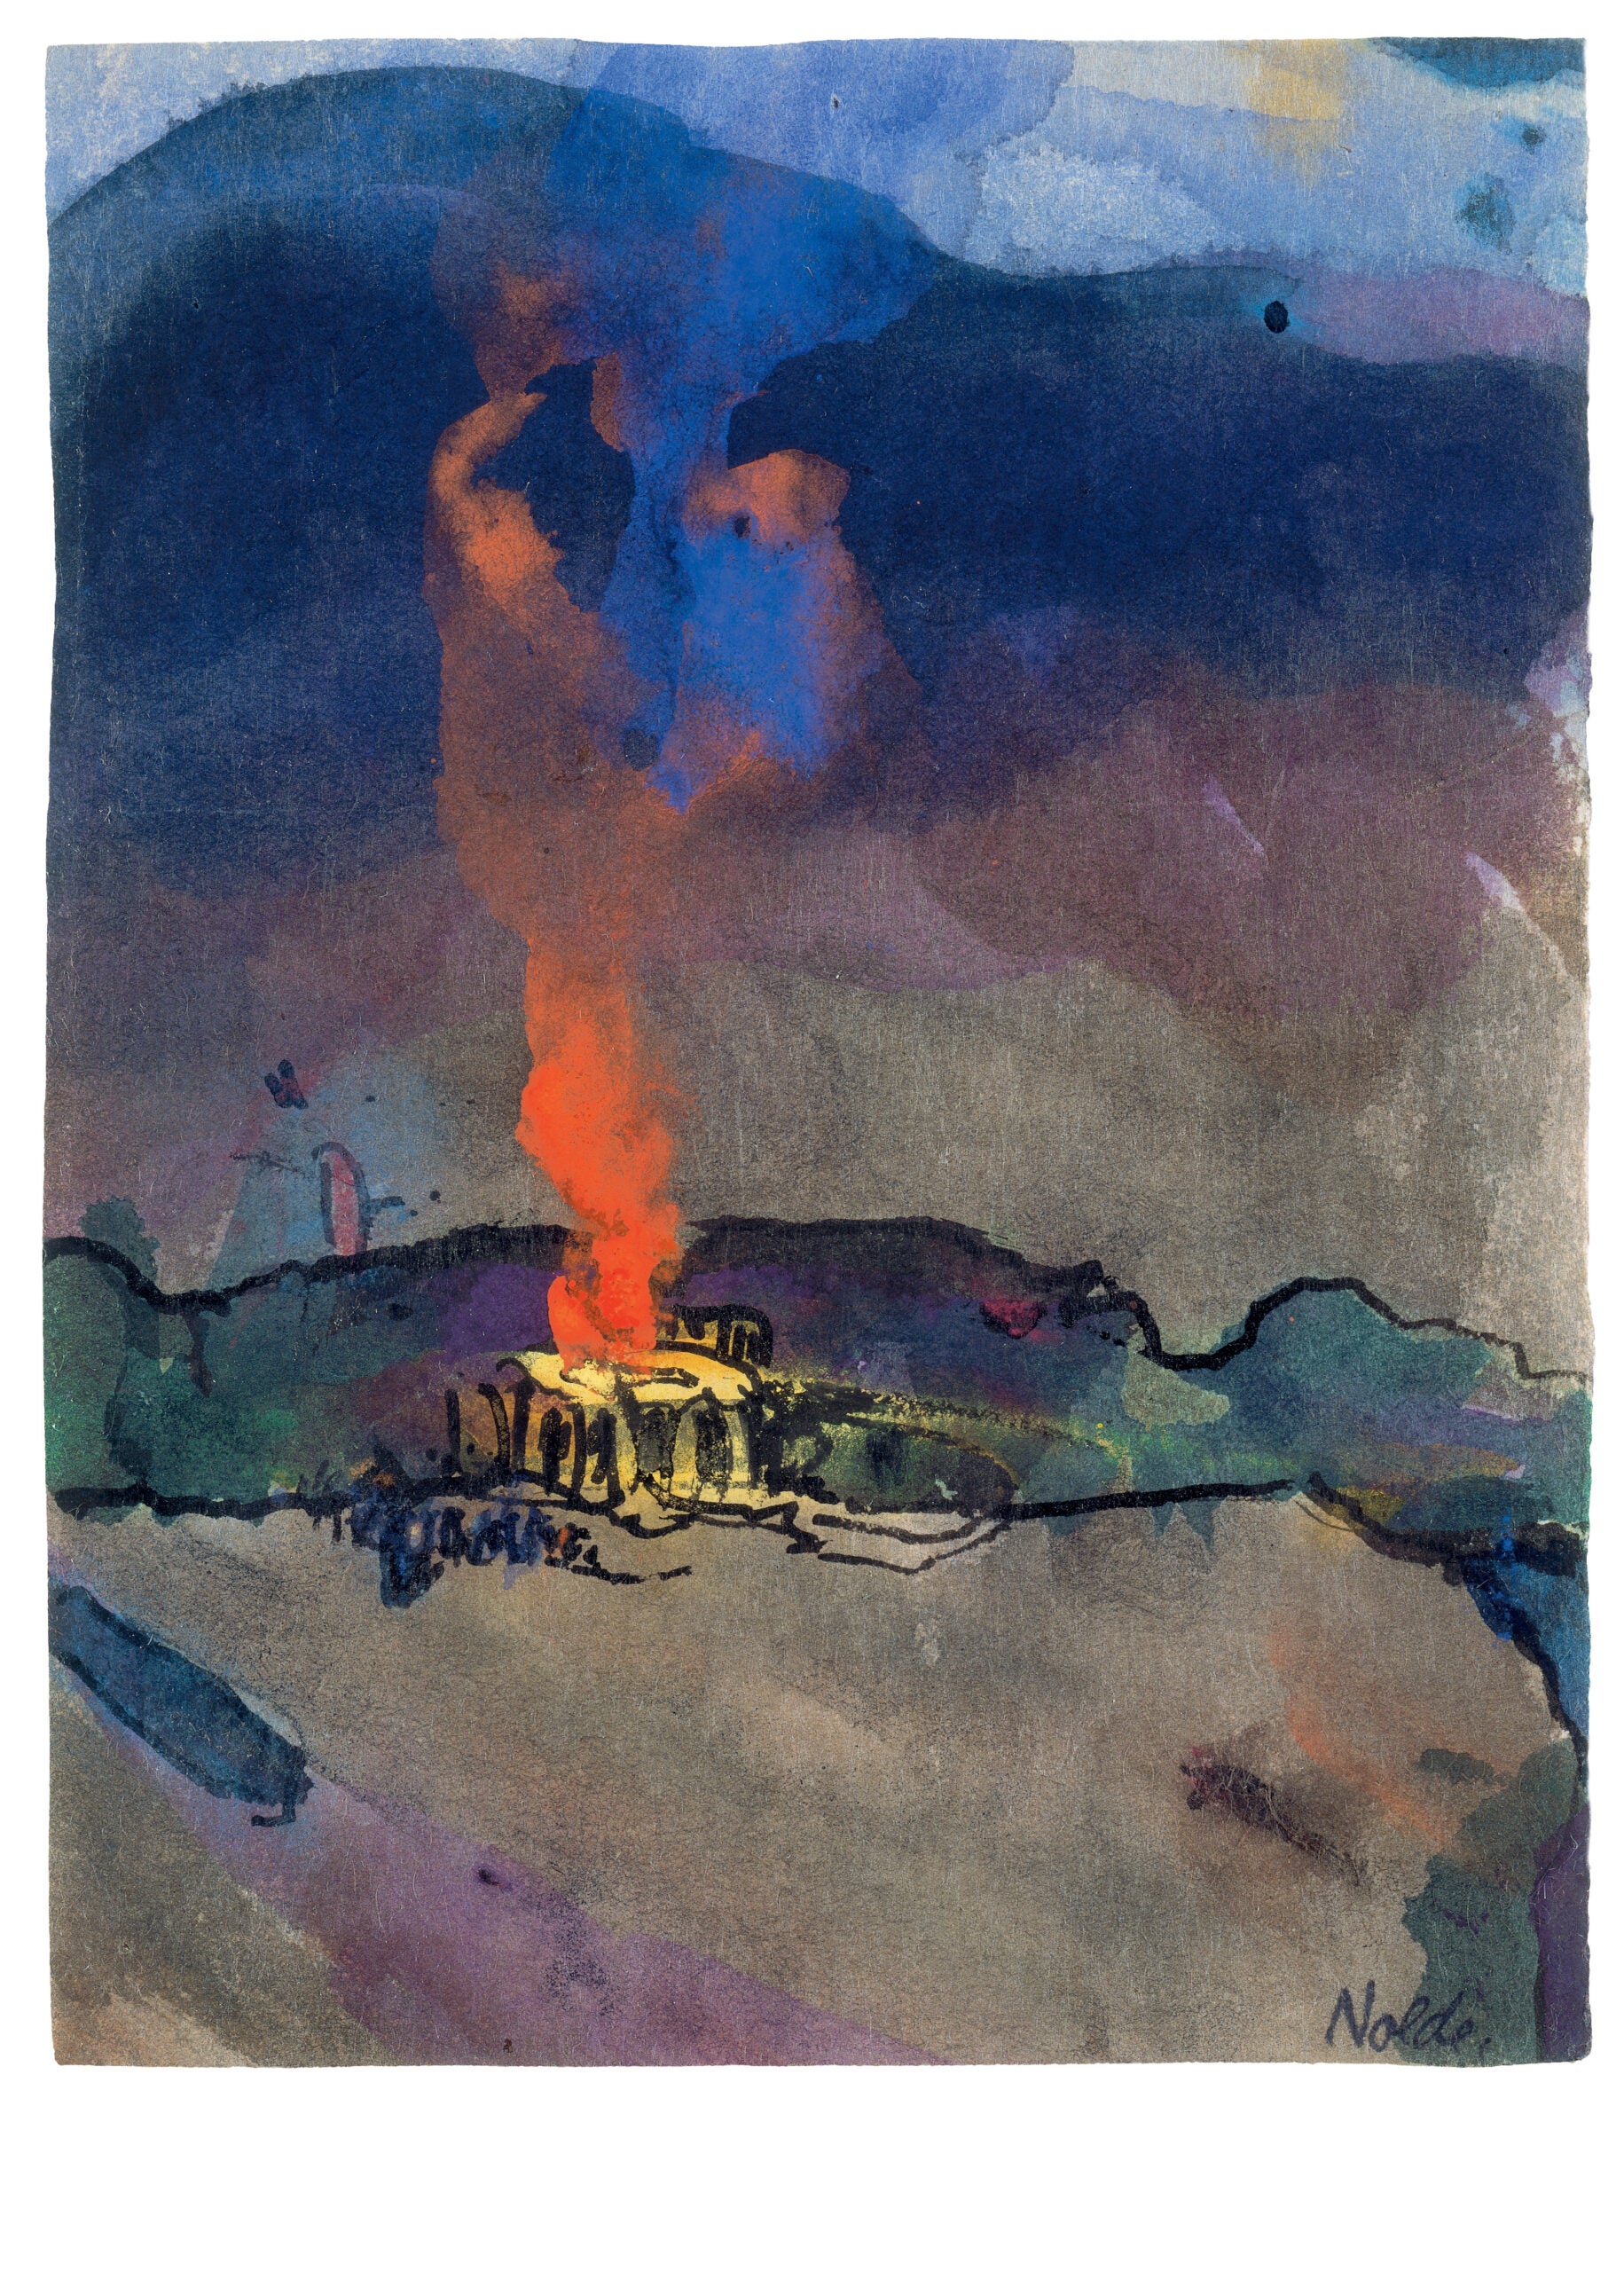 The buried Nazism of expressionist Emil Nolde